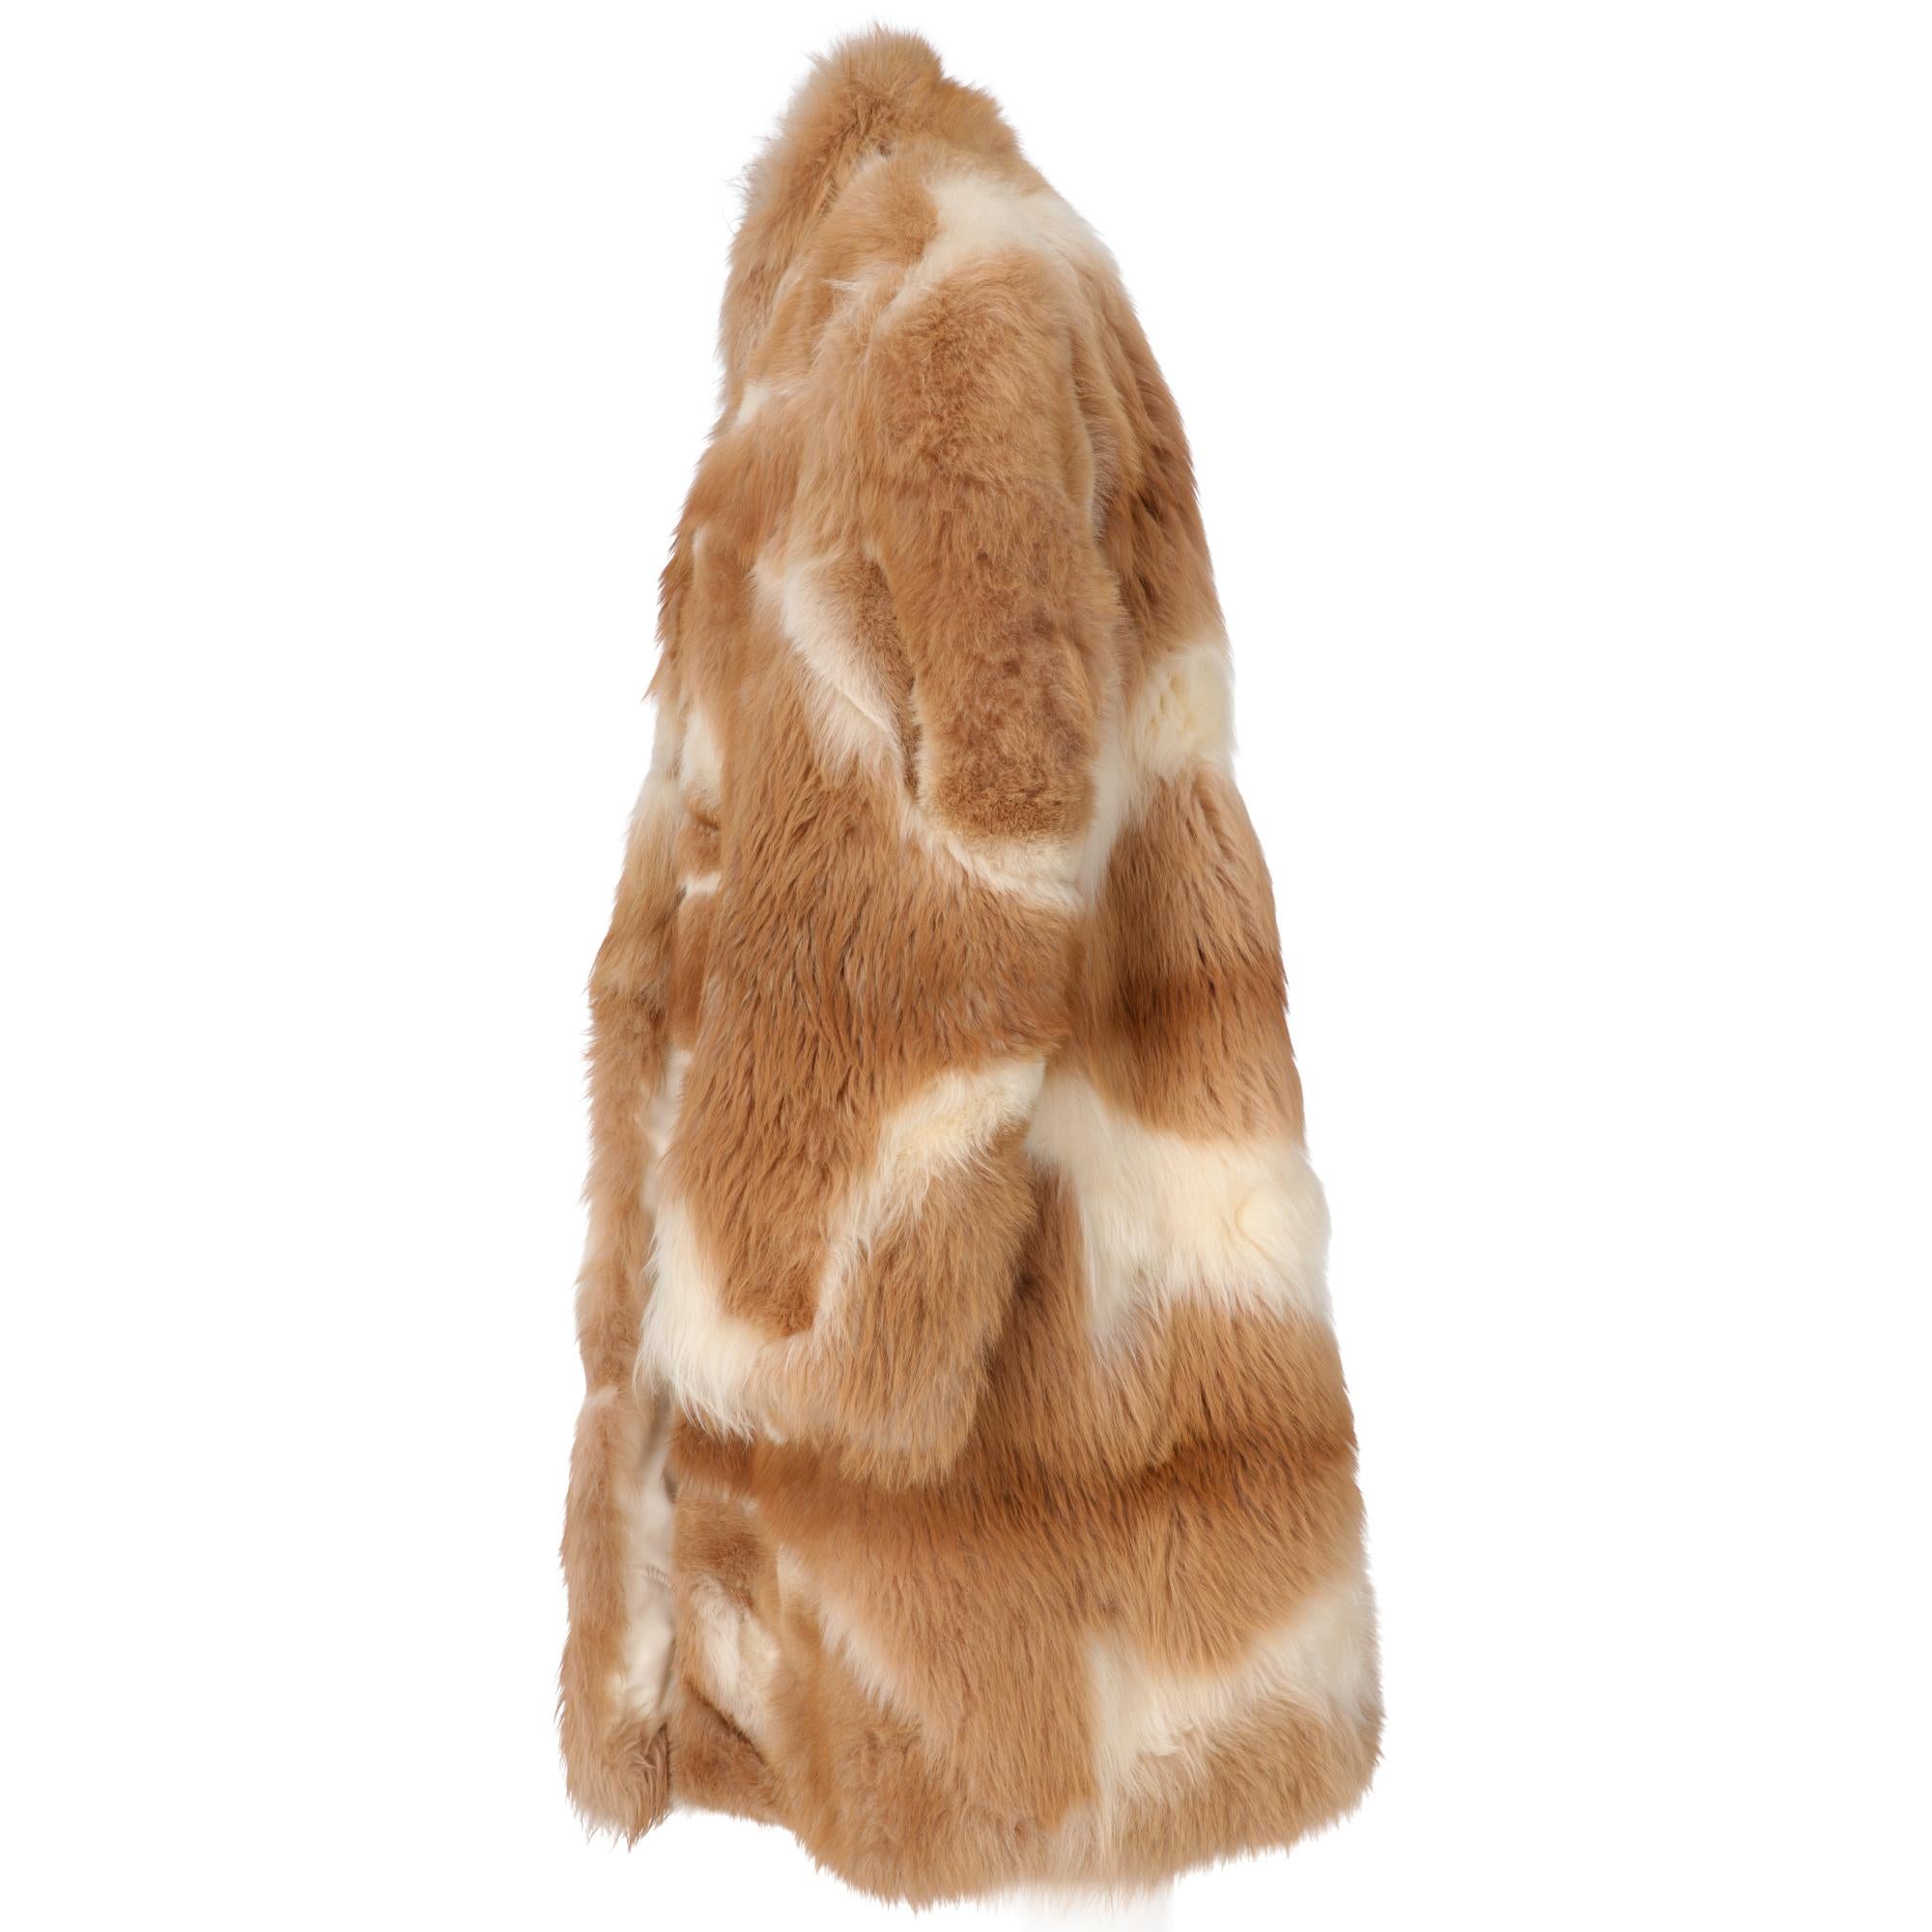 Open coat in guanaco fur long up to the calf in beige with white streaks, pockets inserted in the side seams, long sleeves and quilted interior.

The product has small spots on the lining as shown in the pictures.

This item belongs to an original